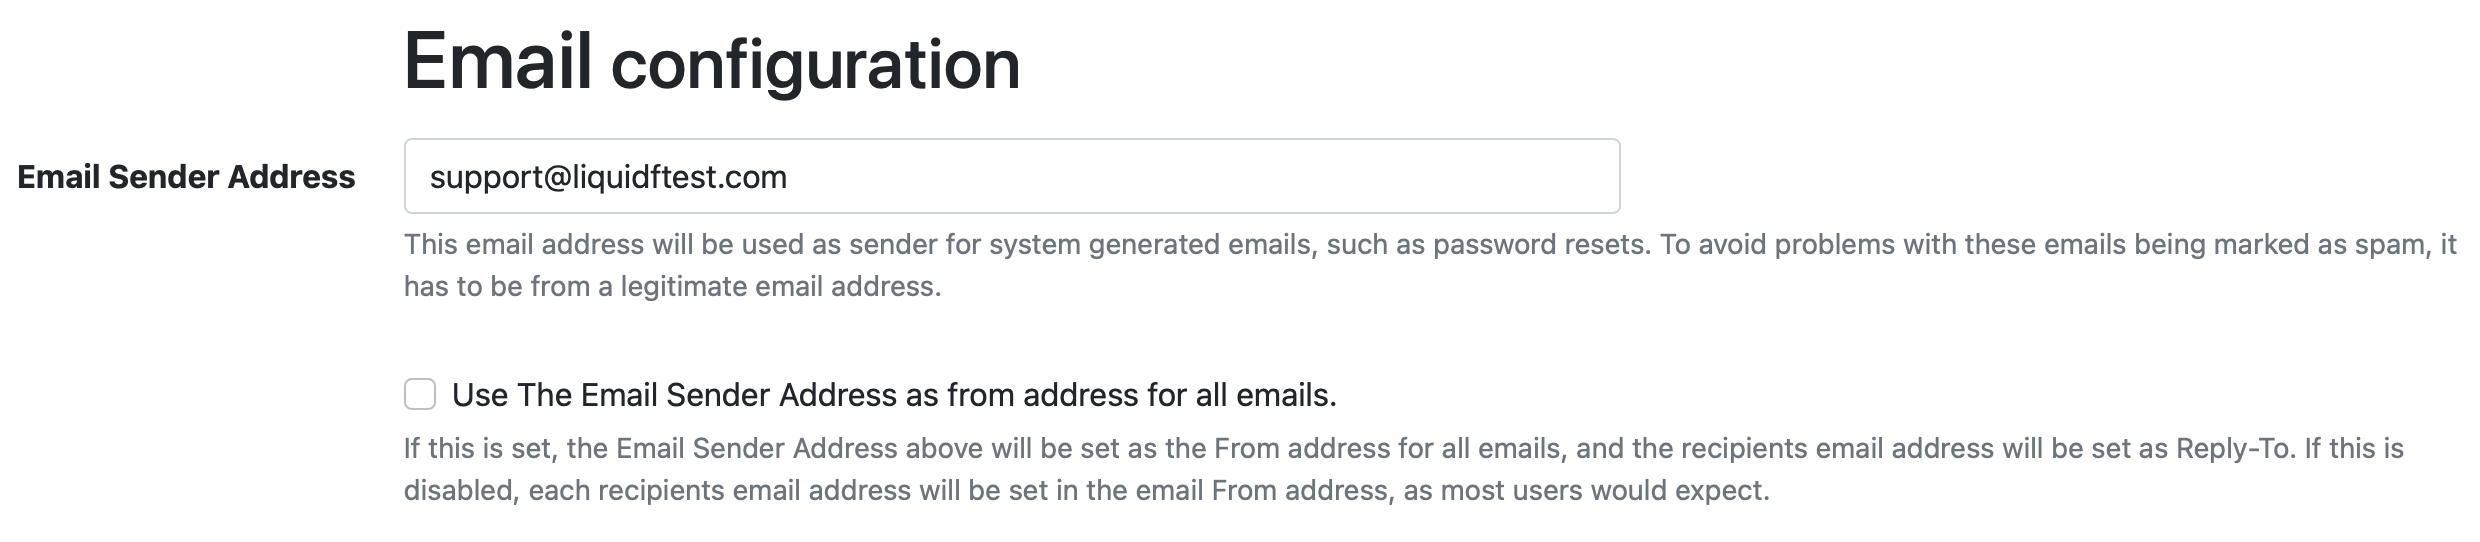 Email Configuration with the setting that Use Email Sender Address for all emails is unchecked